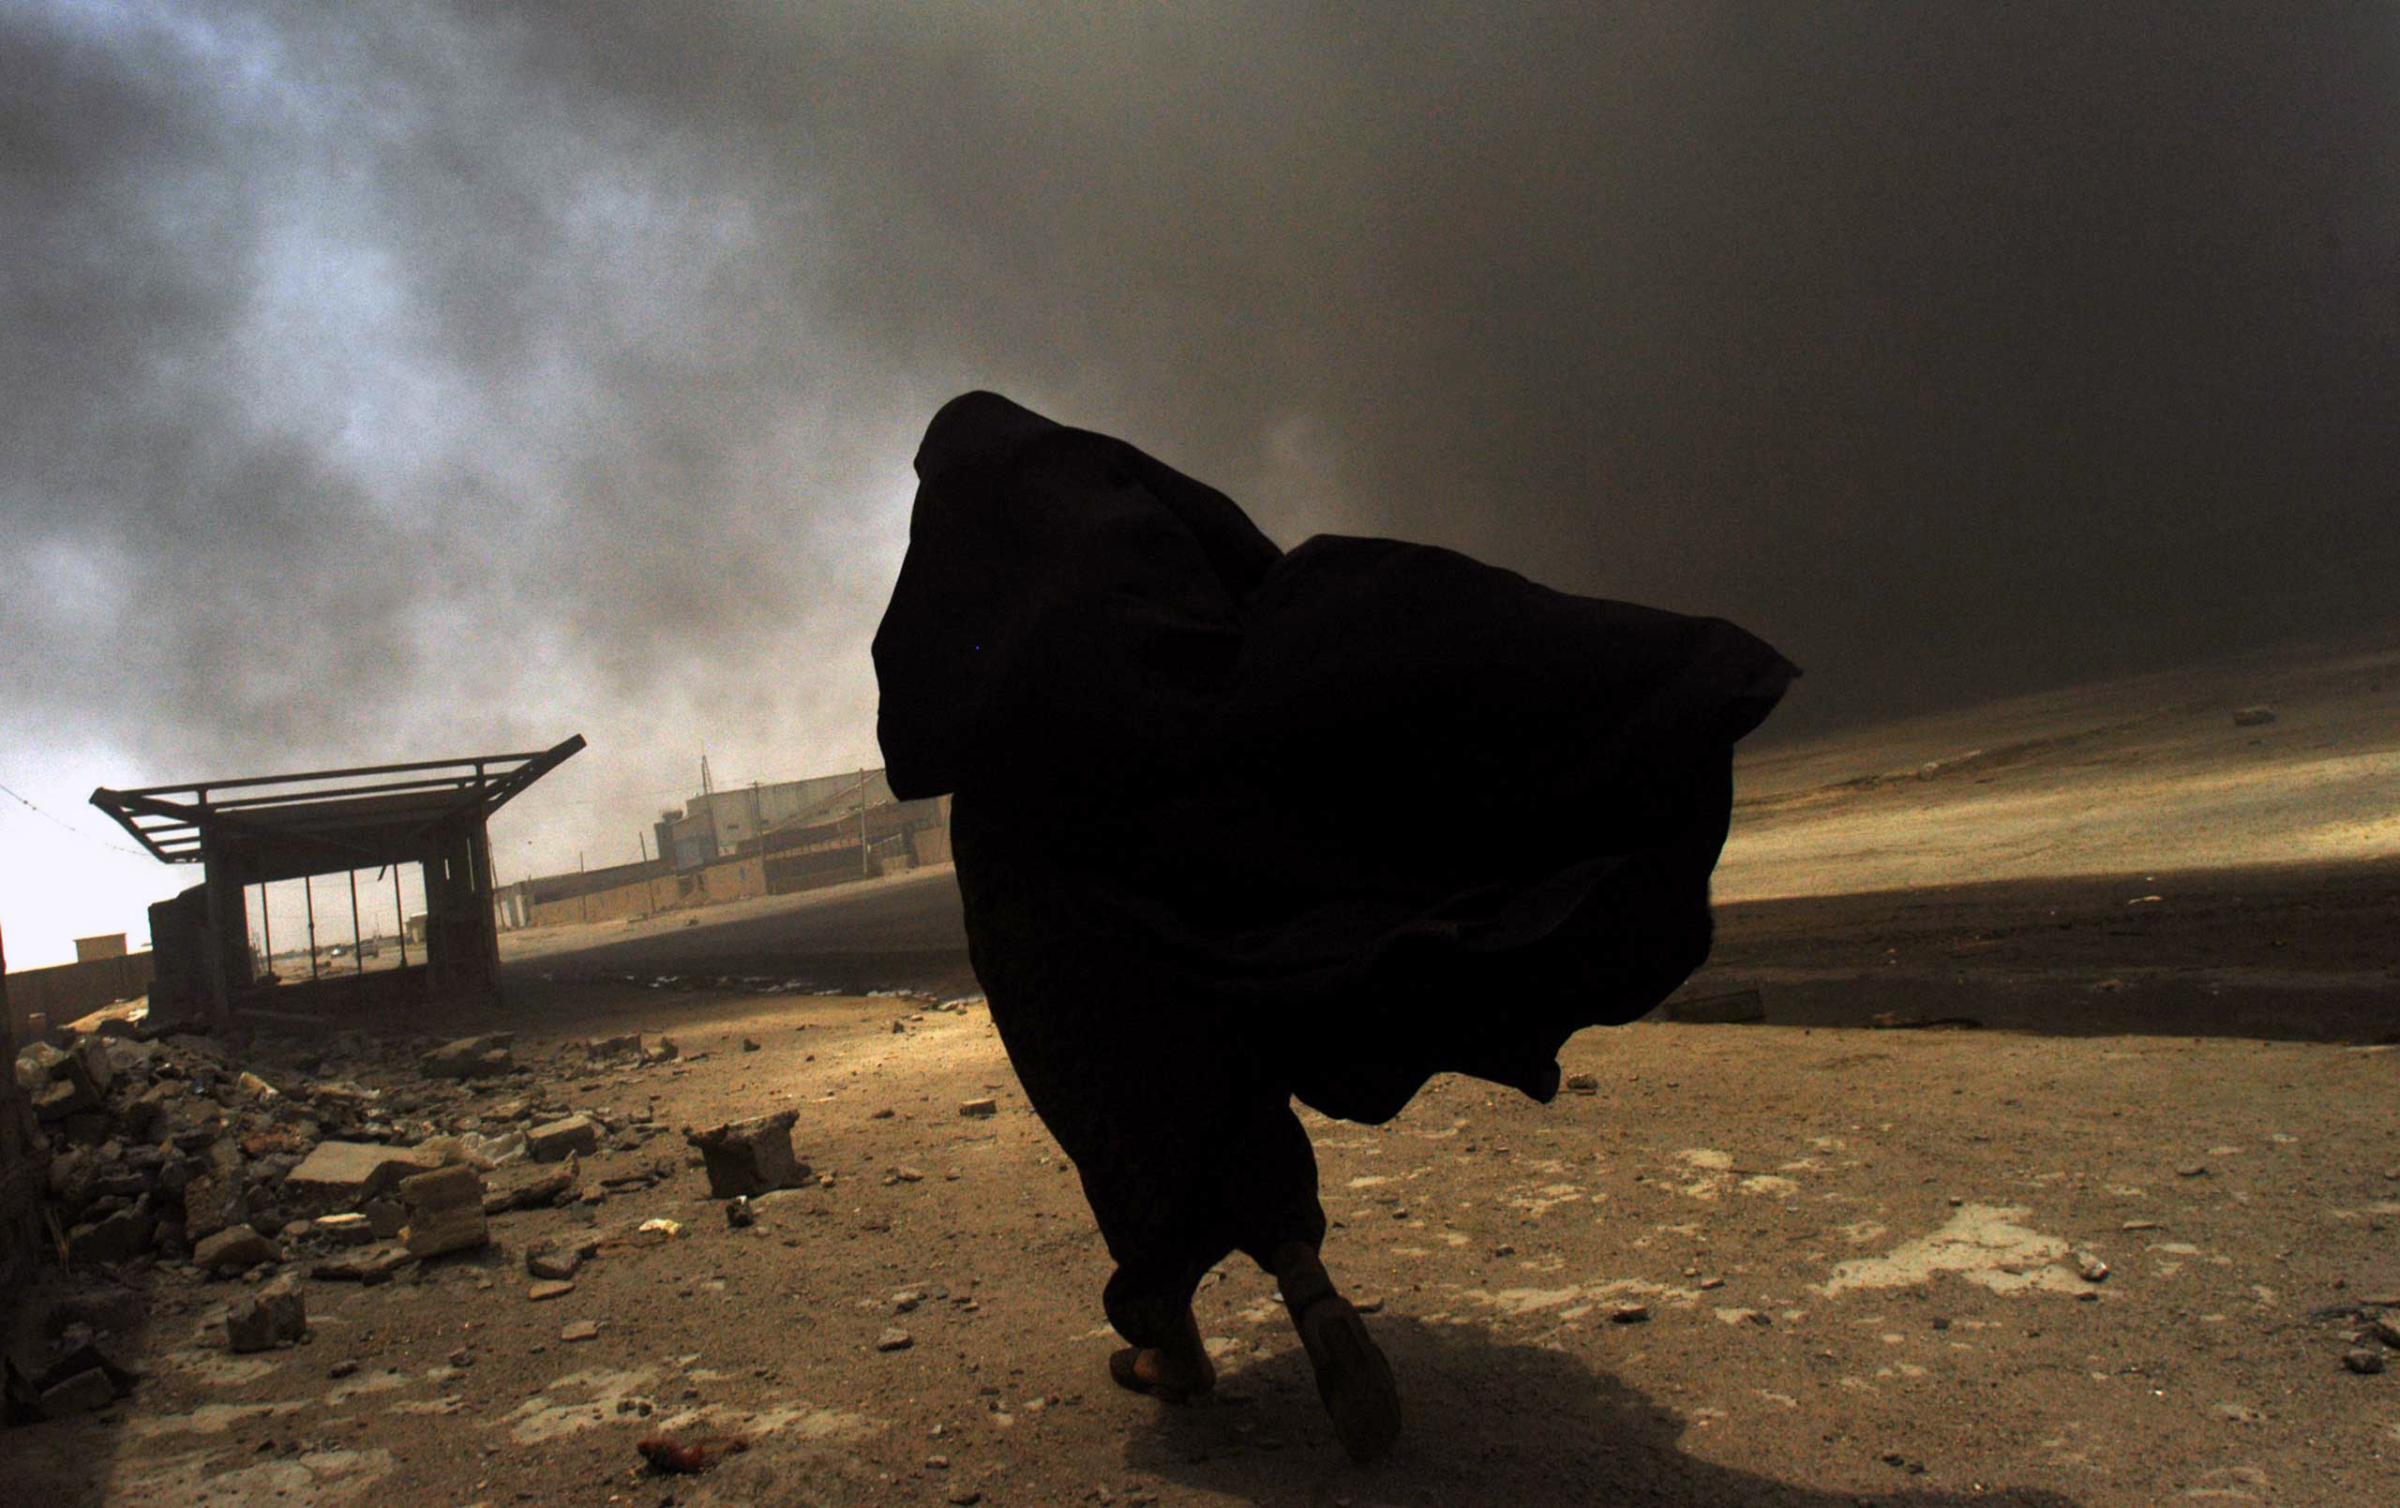 BASRA, IRAQ - MAY 26: An Iraqi woman walks through a plume of smoke rising from a massive fire at a liquid gas factory as she searches for her husband in the vicinity of the fire in Basra, Iraq, May 26, 2003.  The fire was allegedly started by looters picking through the factory, and residents in the vicinity feared the explosion of the four liquid gas tanks on the premisis.  Weeks after the end of the war, looting continues to be one of the main problems for both Basra and Bagdad cities as coalition forces struggle to get life back to normal.  (Photo by Lynsey Addario/Getty Images Reportage)